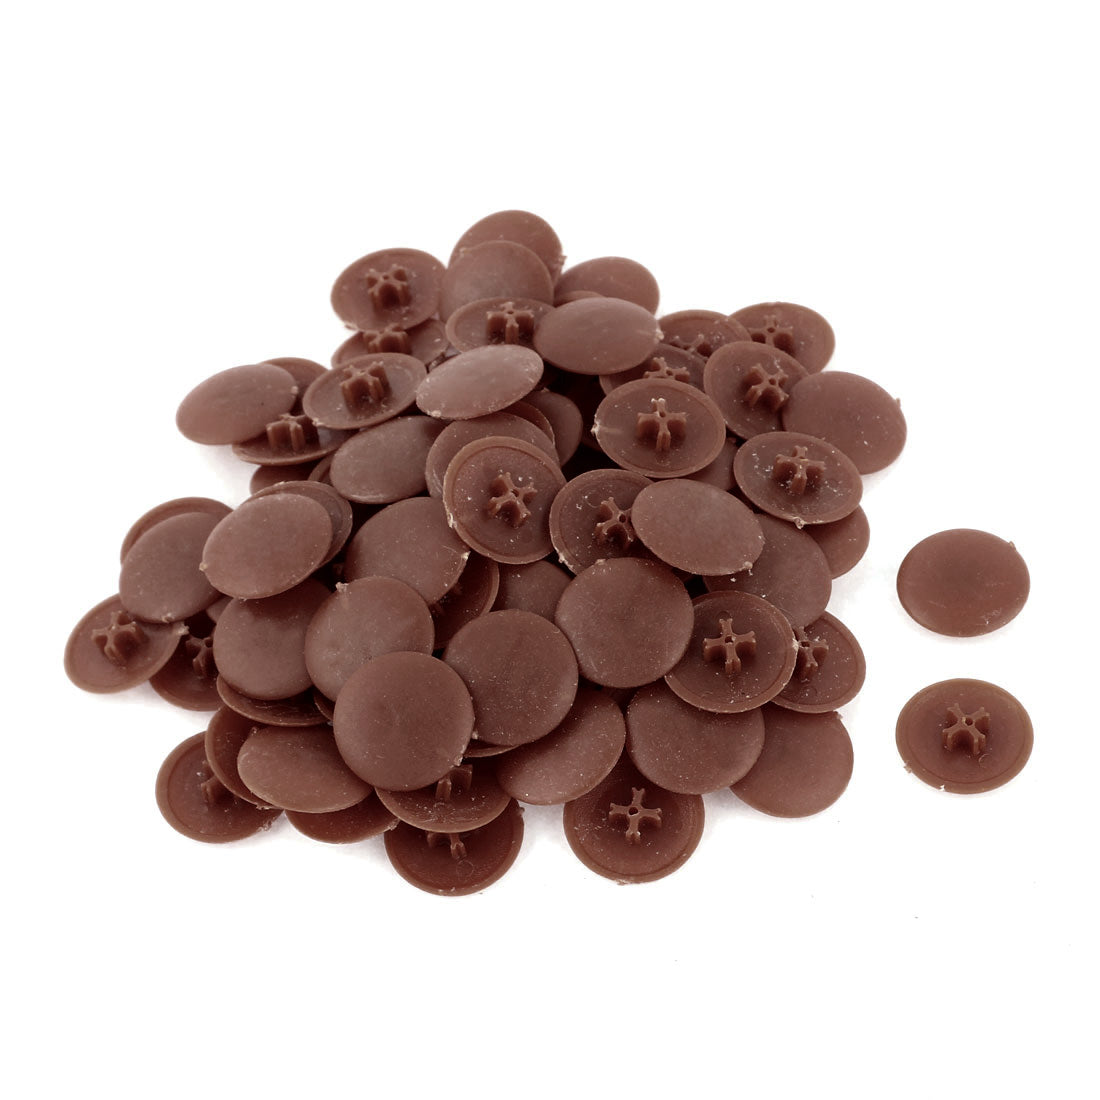 uxcell Uxcell 17mmx4mm Plastic Round Shape Phillips Screw Cap Cover Dark Brown 100pcs